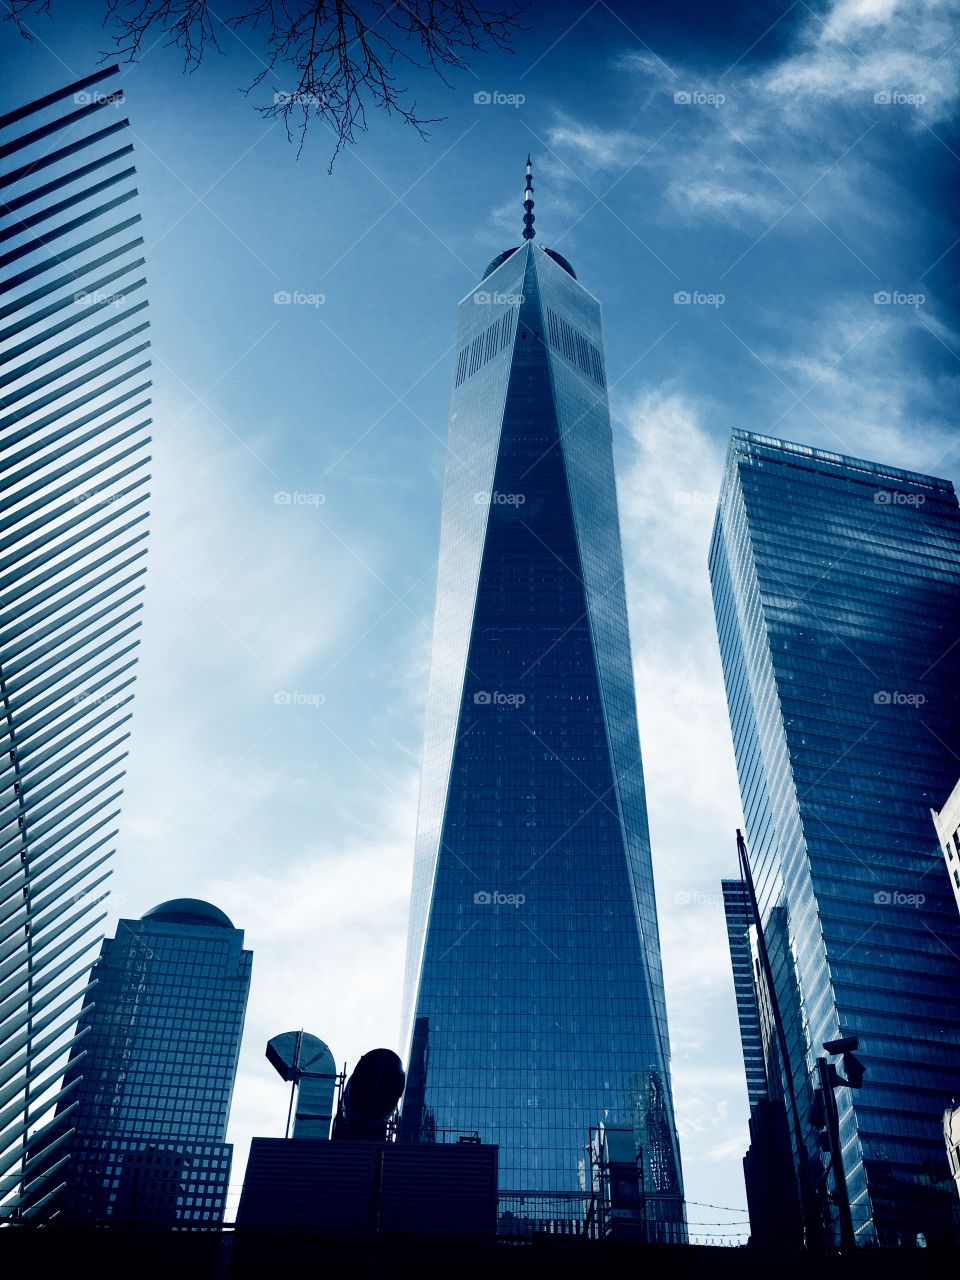 “Freedom Tower”